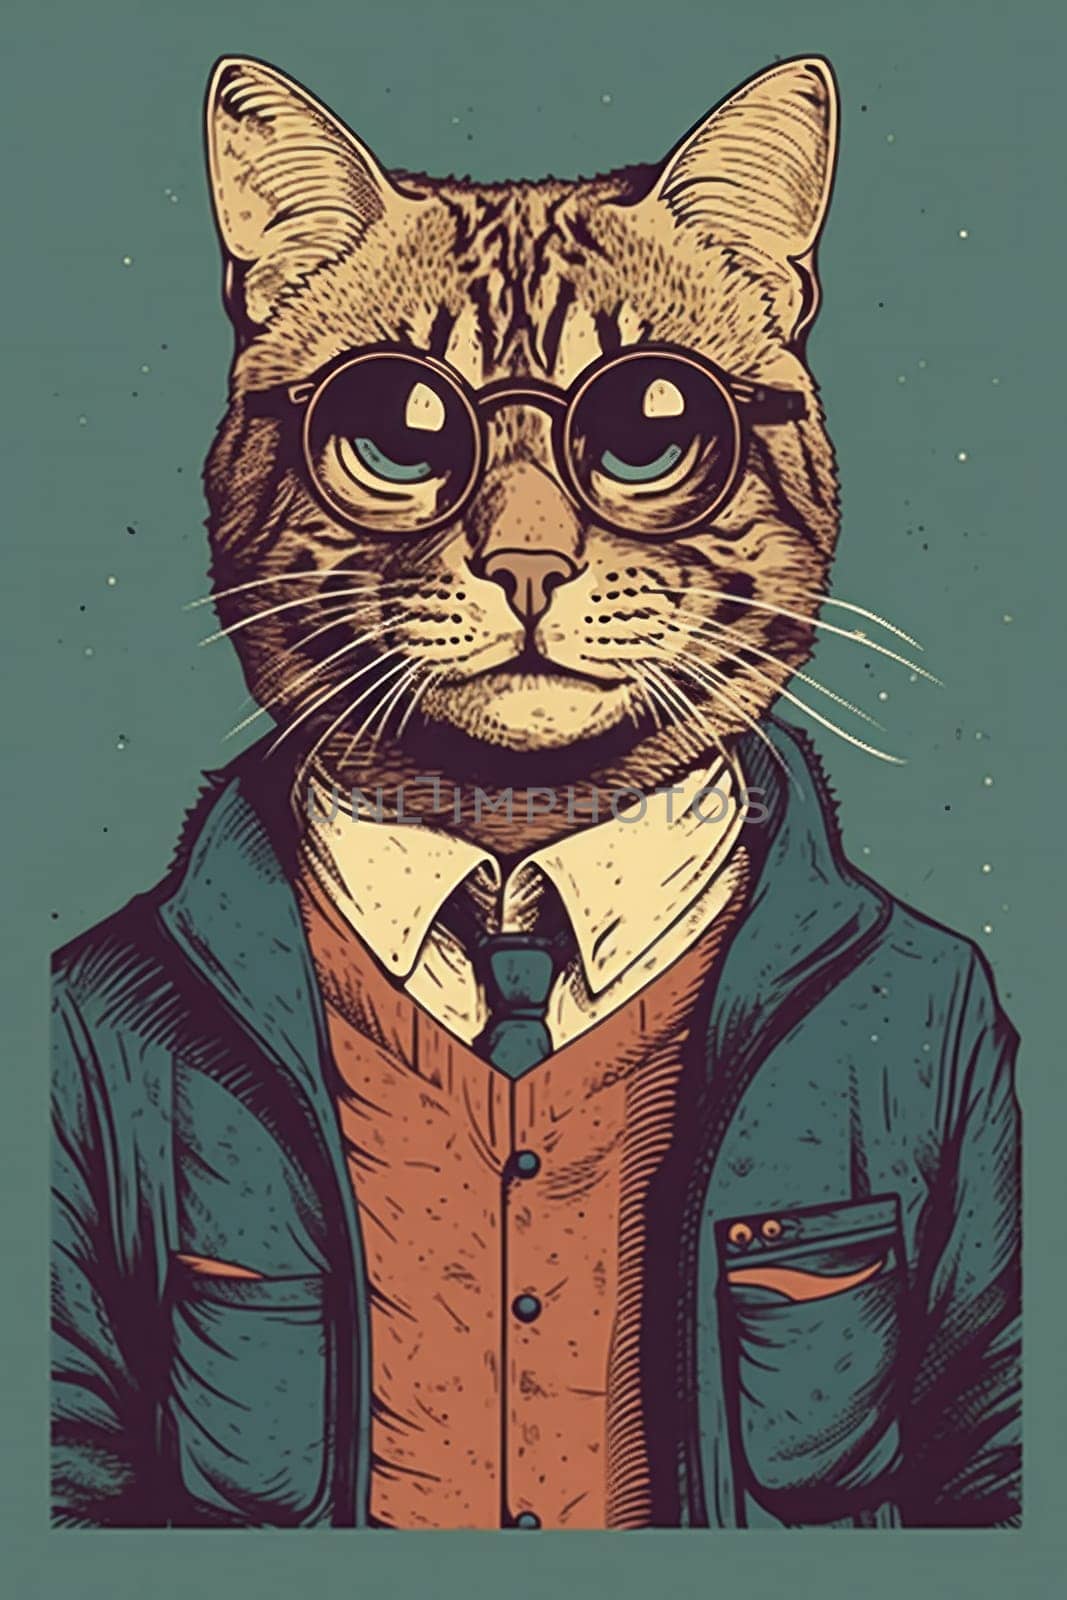 A cat wearing a suit and tie, AI by starush